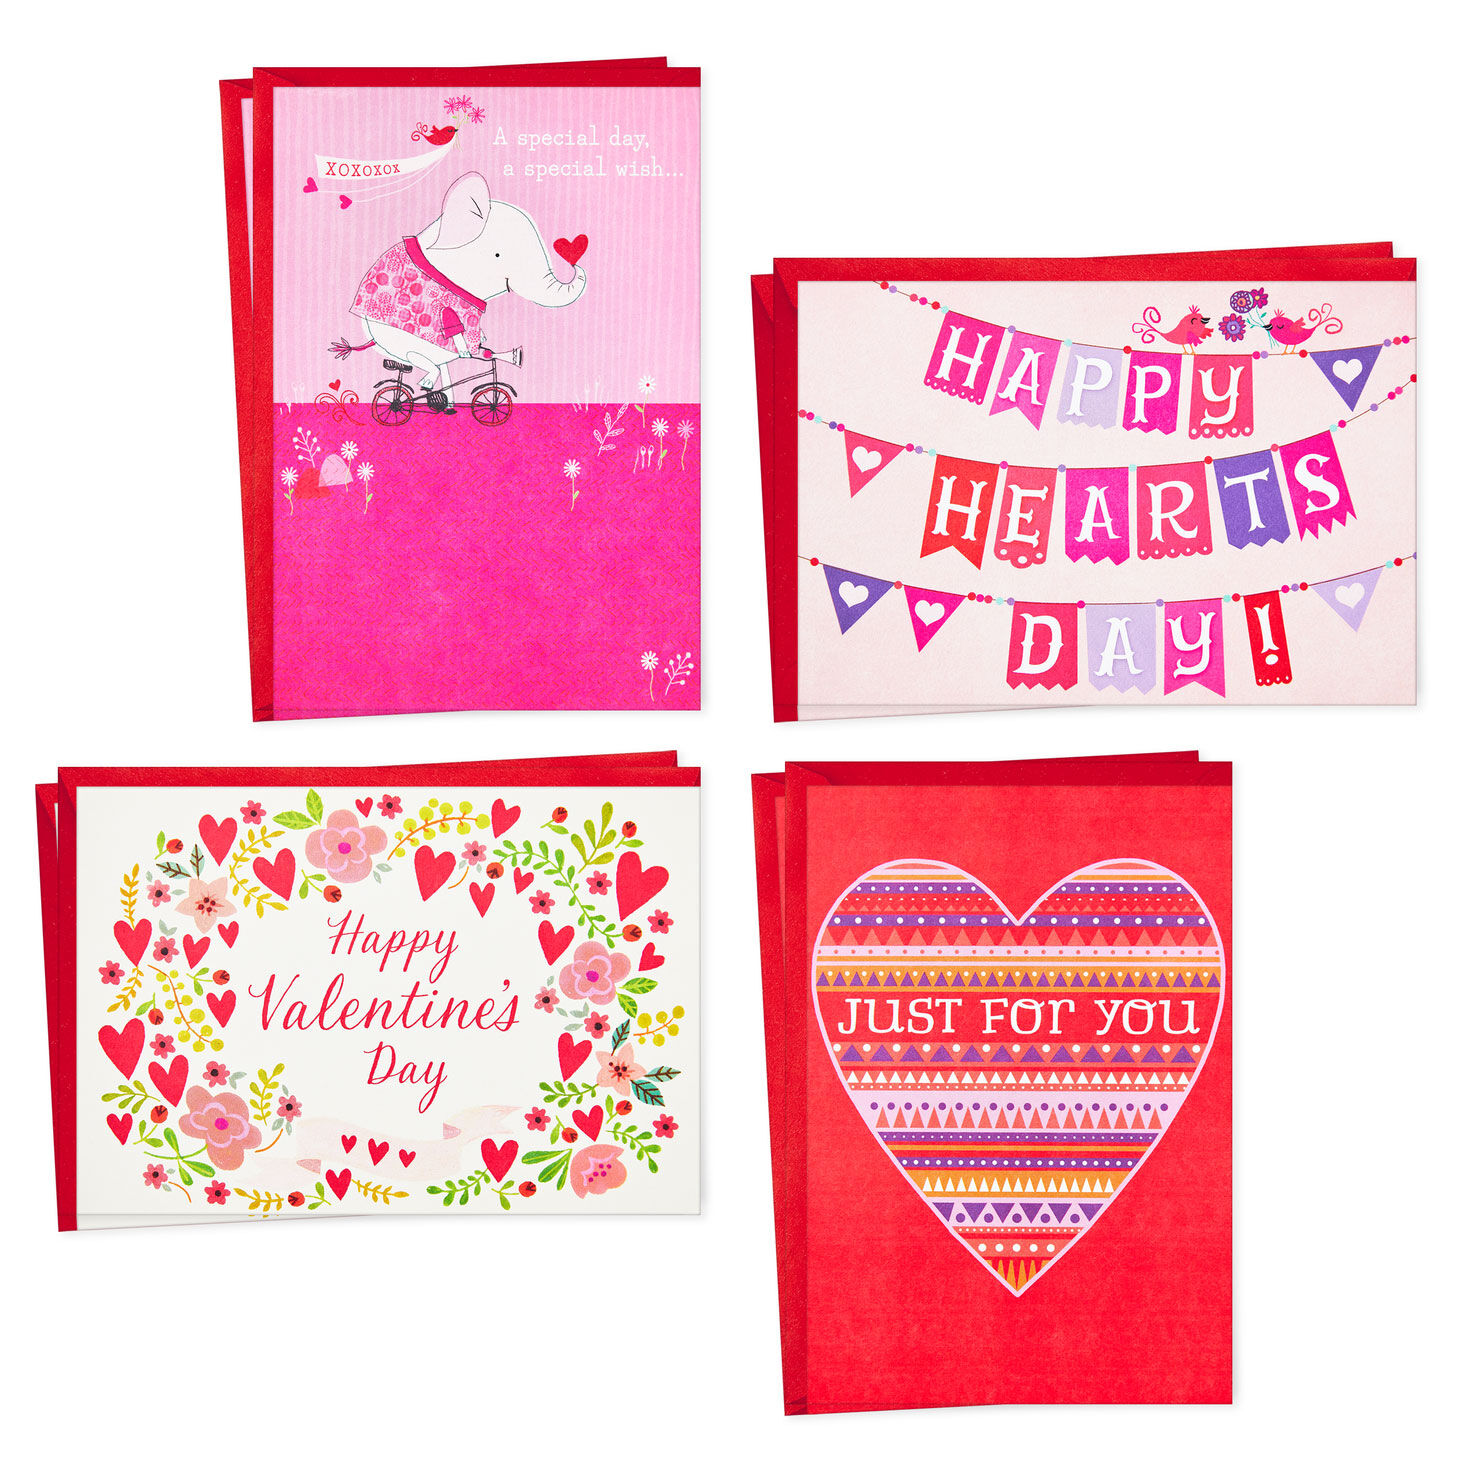 24 Cards with Envelopes Hallmark Kids Valentines Day Cards Hearts All Occasion Cards Assortment 